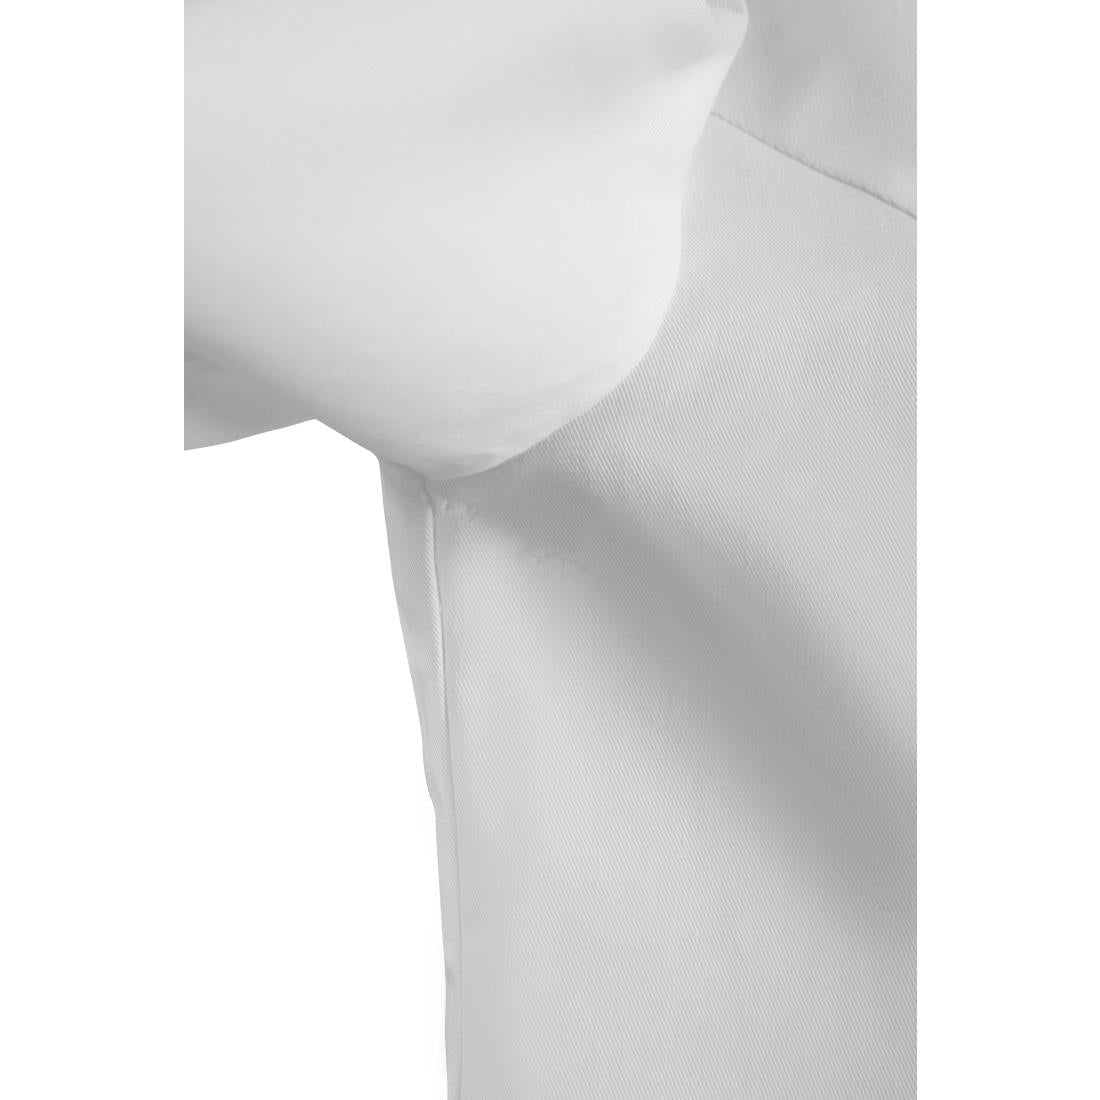 BB701-L Whites Ladies Fitted Jacket - Size L JD Catering Equipment Solutions Ltd